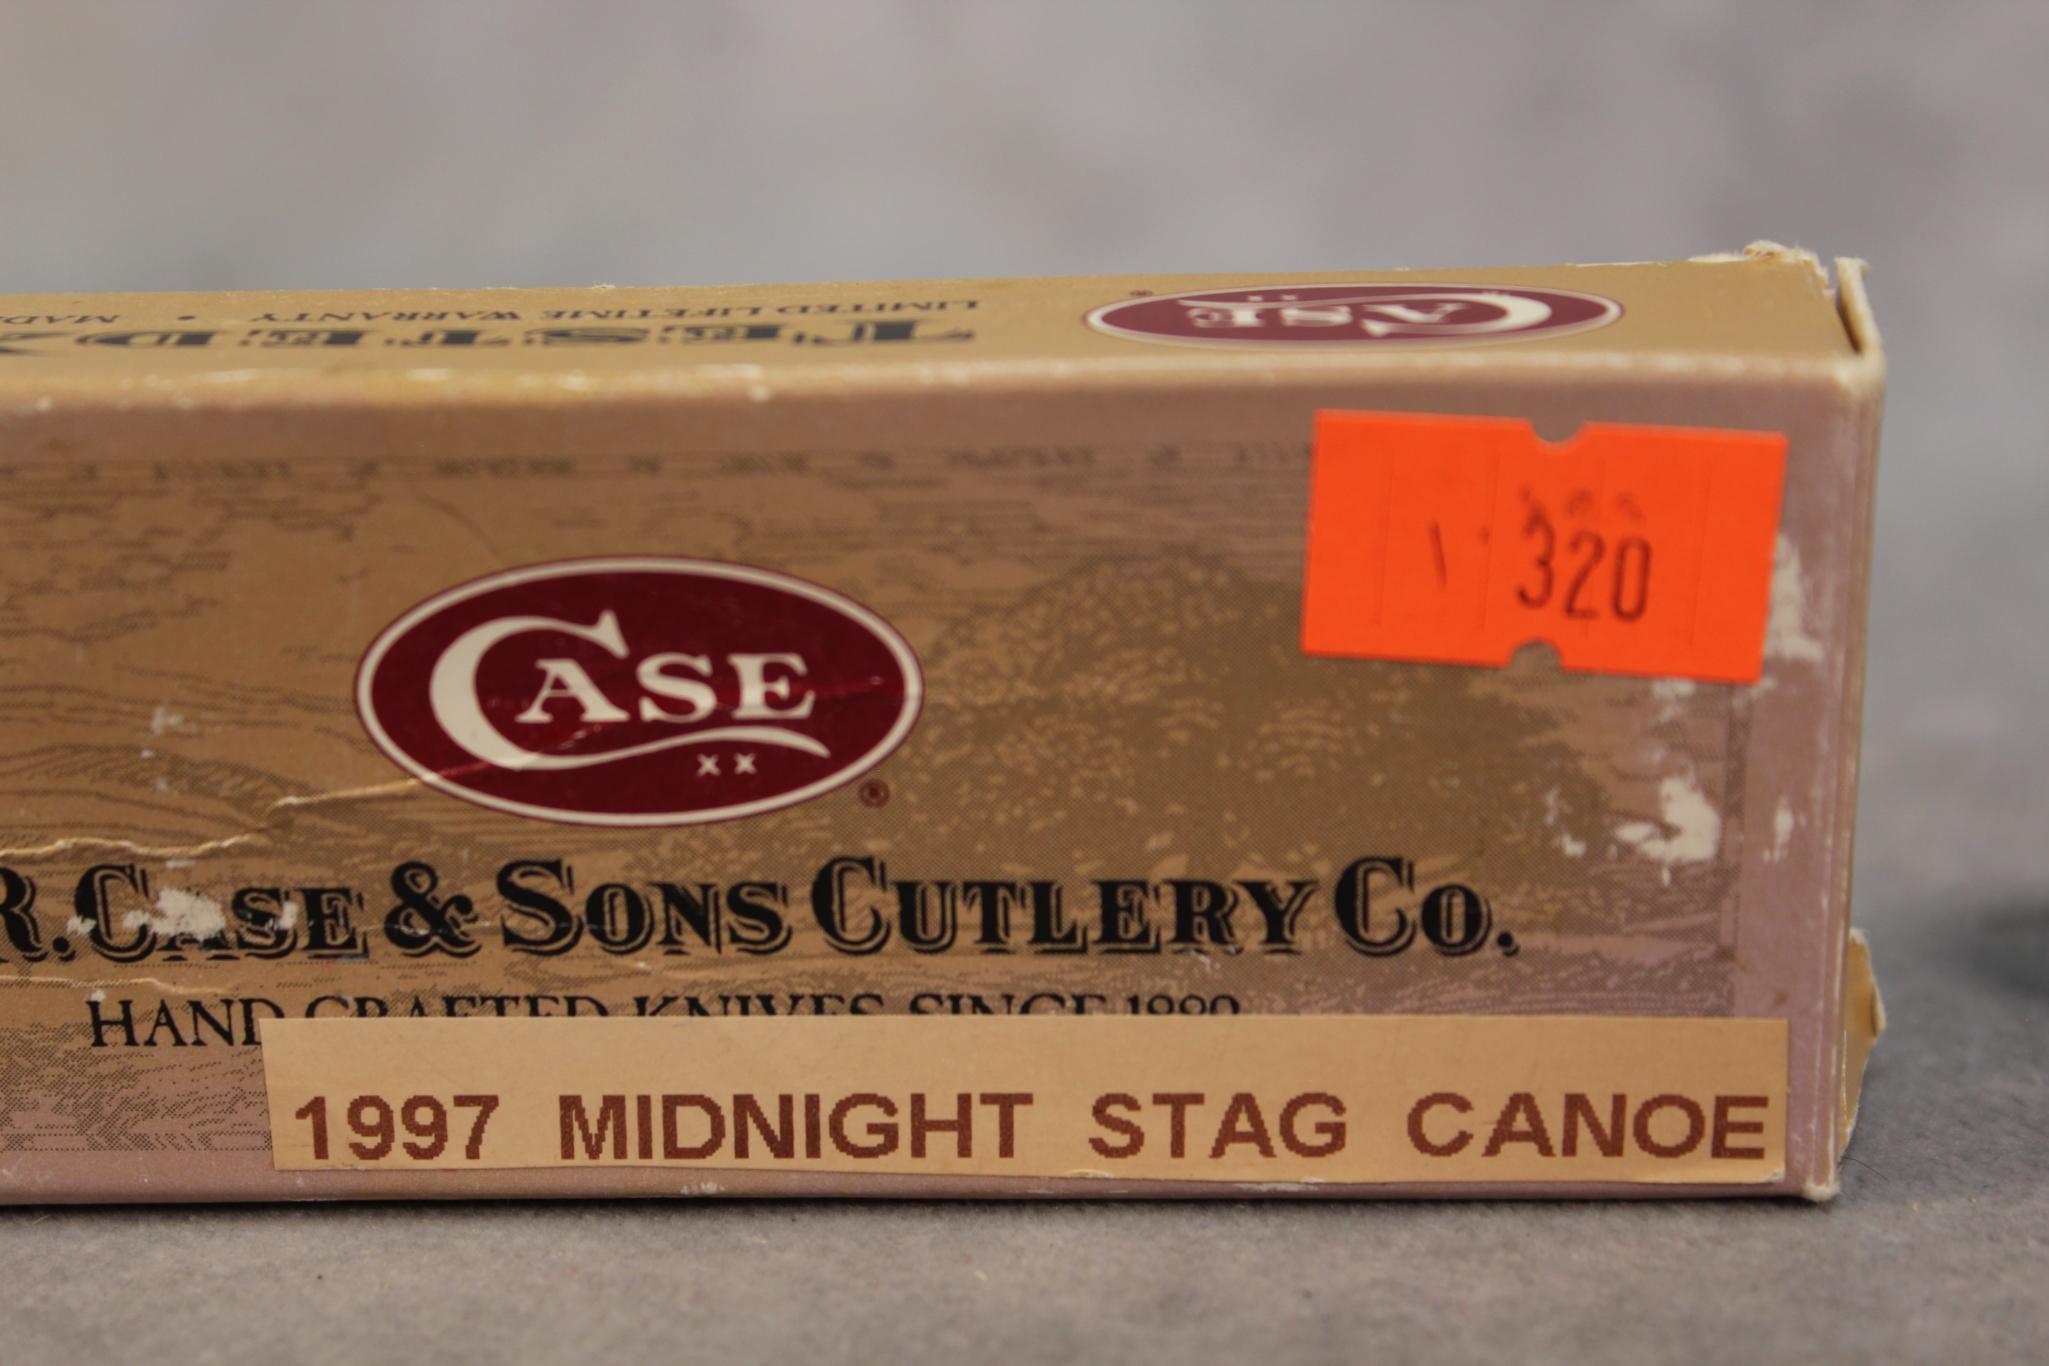 1997 CASE MIDNIGHT STAG CANOE FIRST PRODUCTION RUN 52131 SS